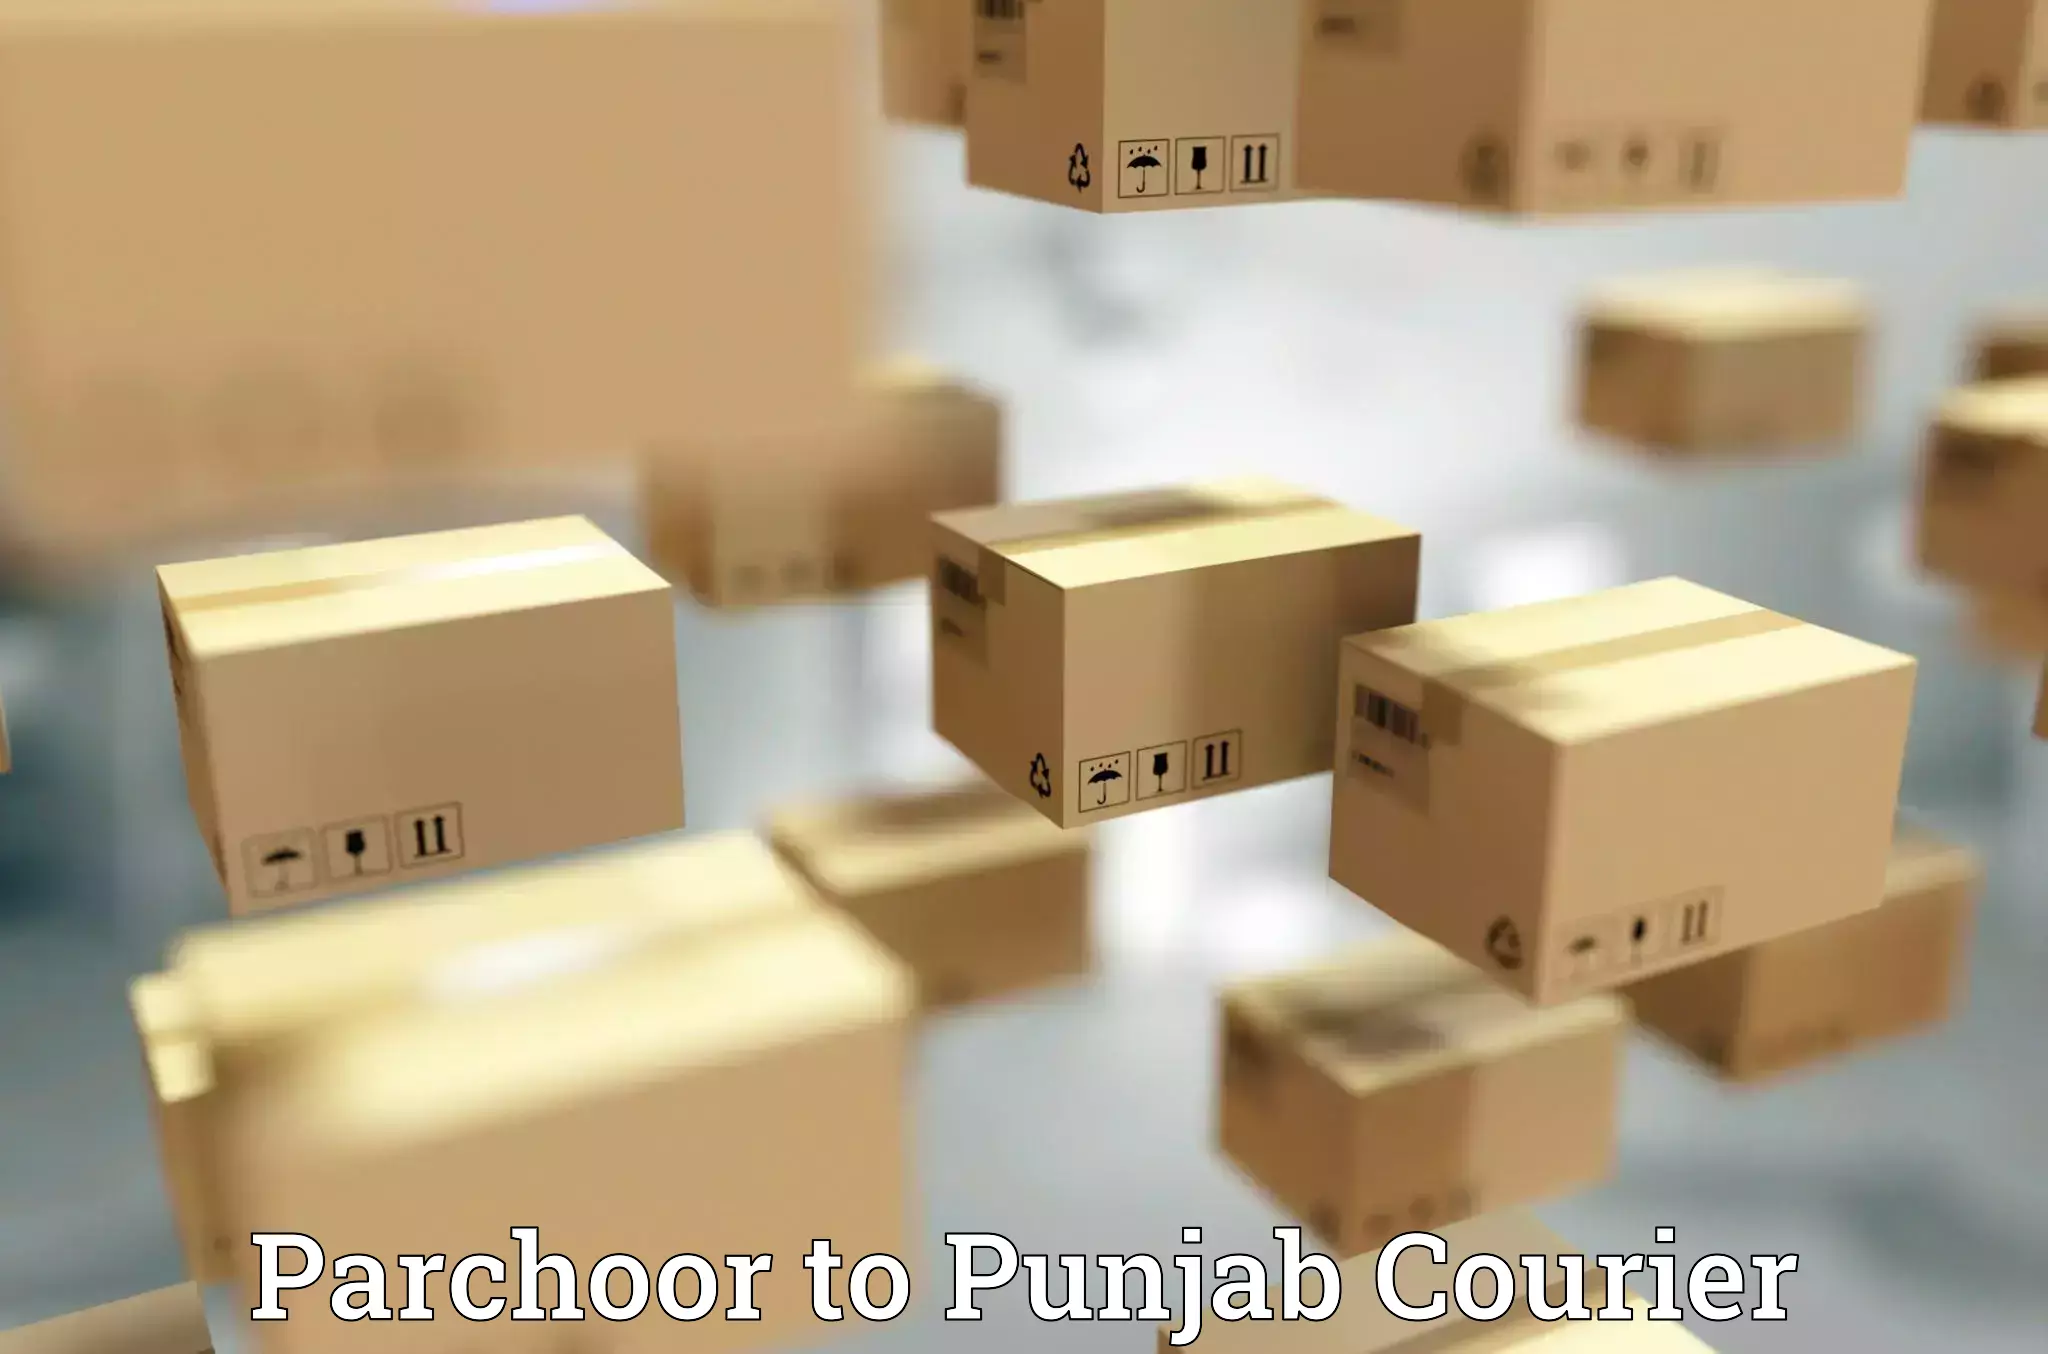 Quality courier partnerships Parchoor to Tarsikka